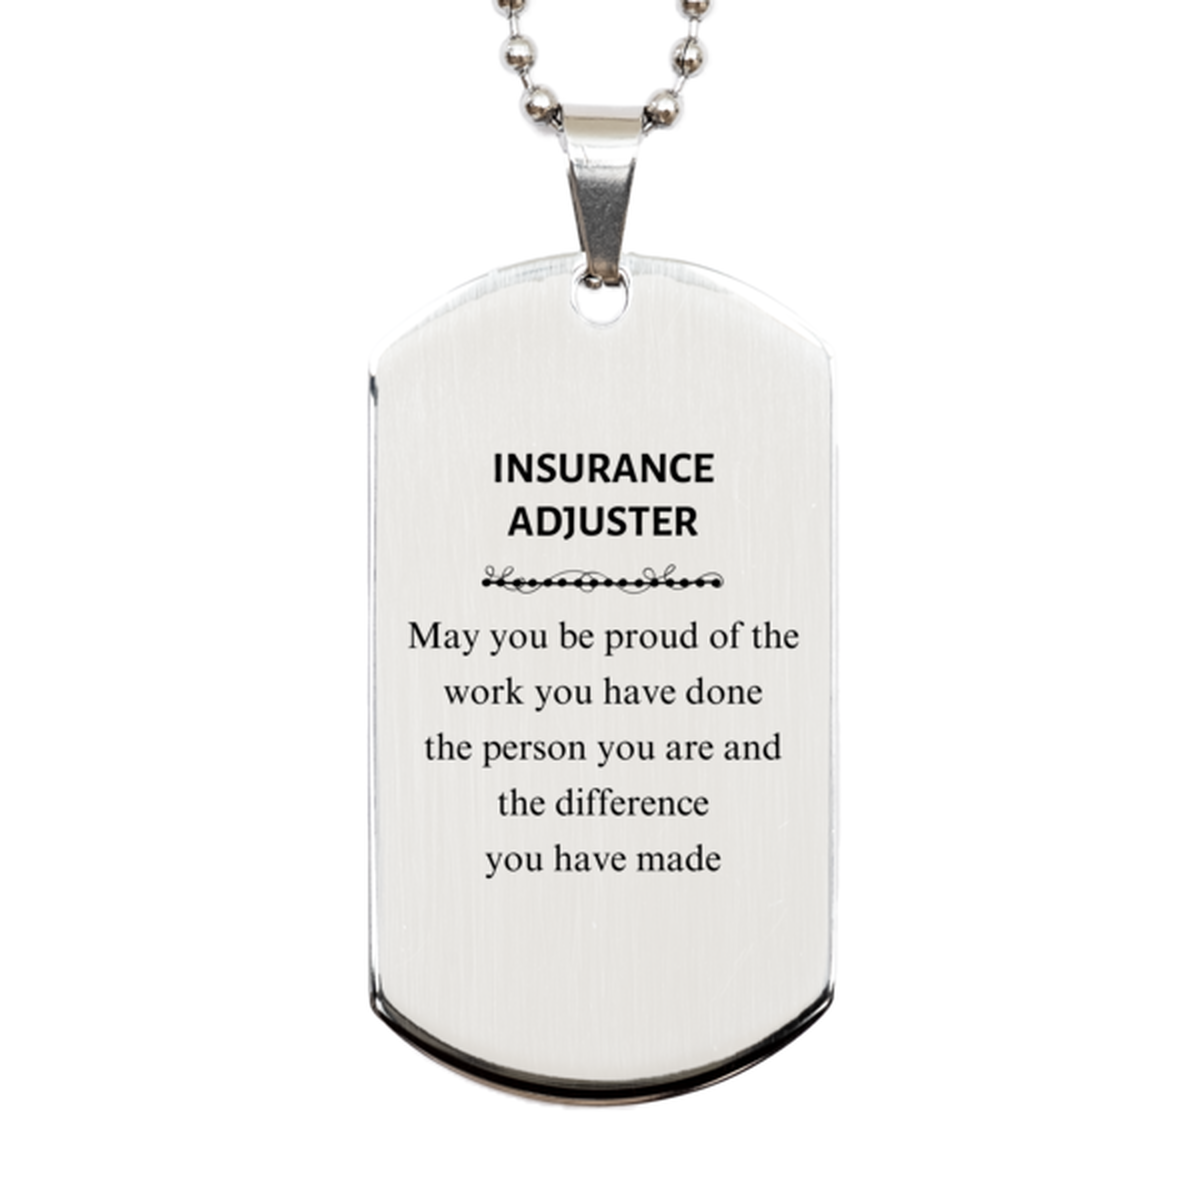 Insurance Adjuster May you be proud of the work you have done, Retirement Insurance Adjuster Silver Dog Tag for Colleague Appreciation Gifts Amazing for Insurance Adjuster